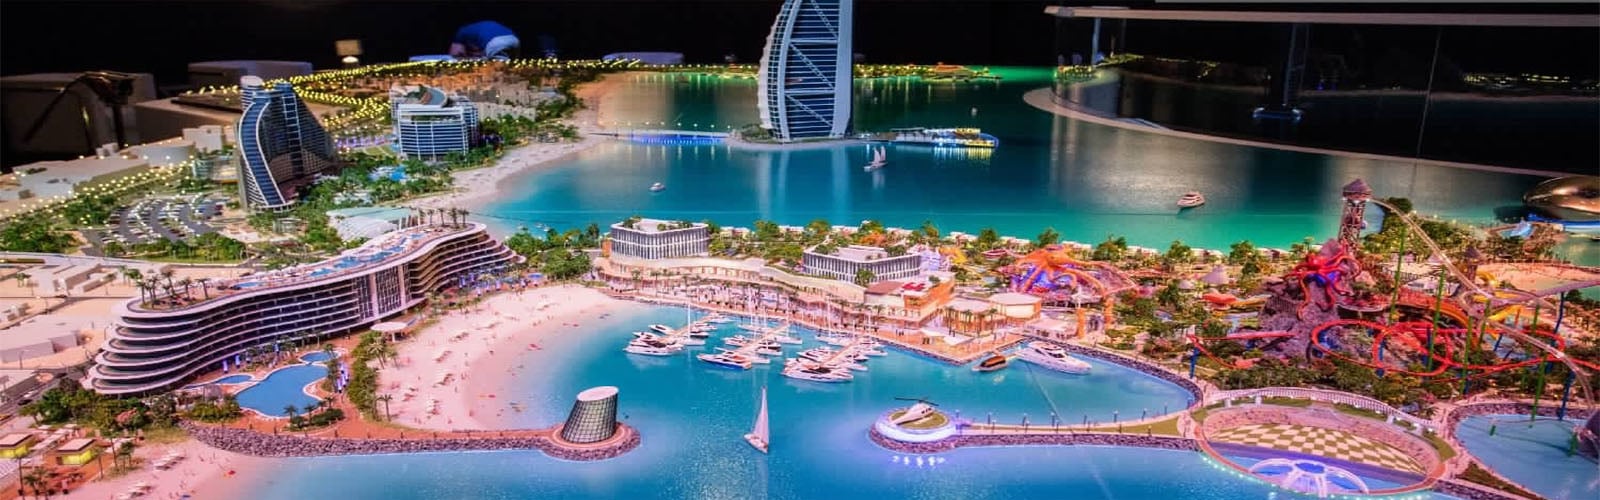 Dubai plans new artificial islands to attract tourists